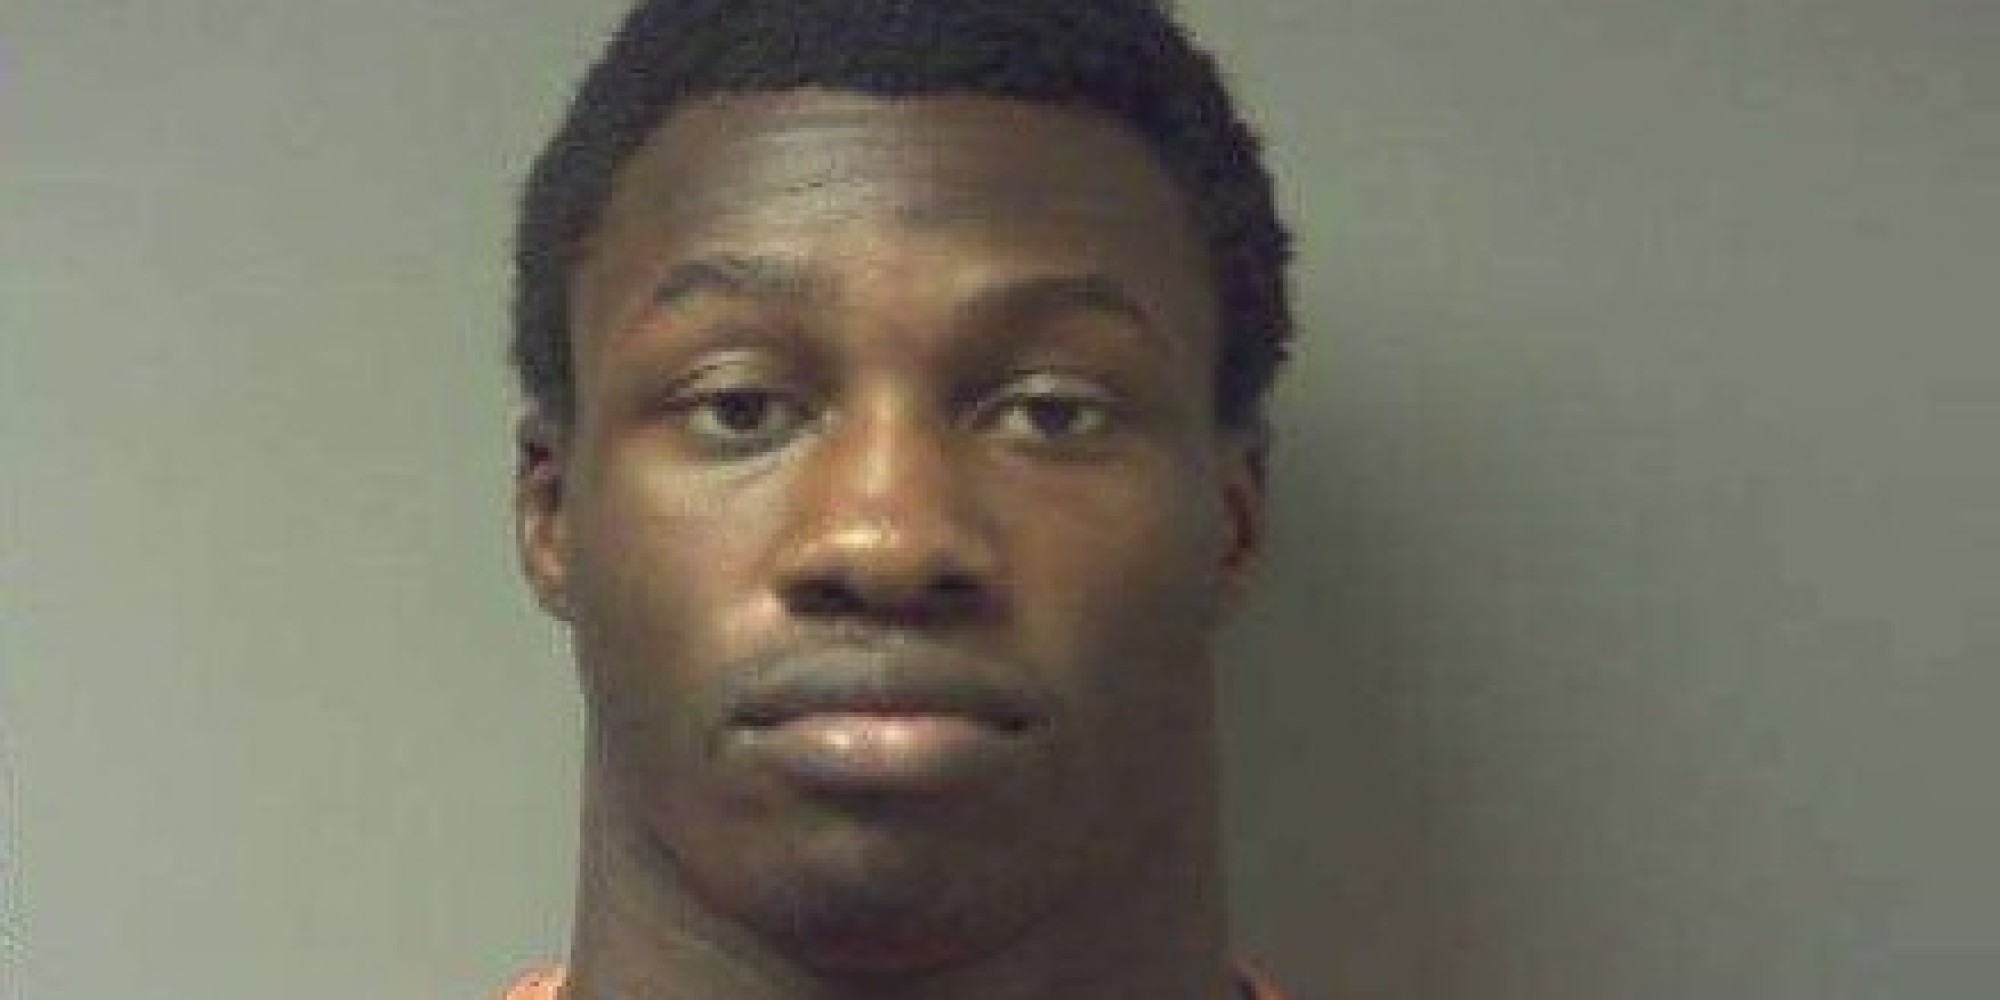 Njcaa National Champion Wrestler Sentenced To 60 Years For Spreading Hiv